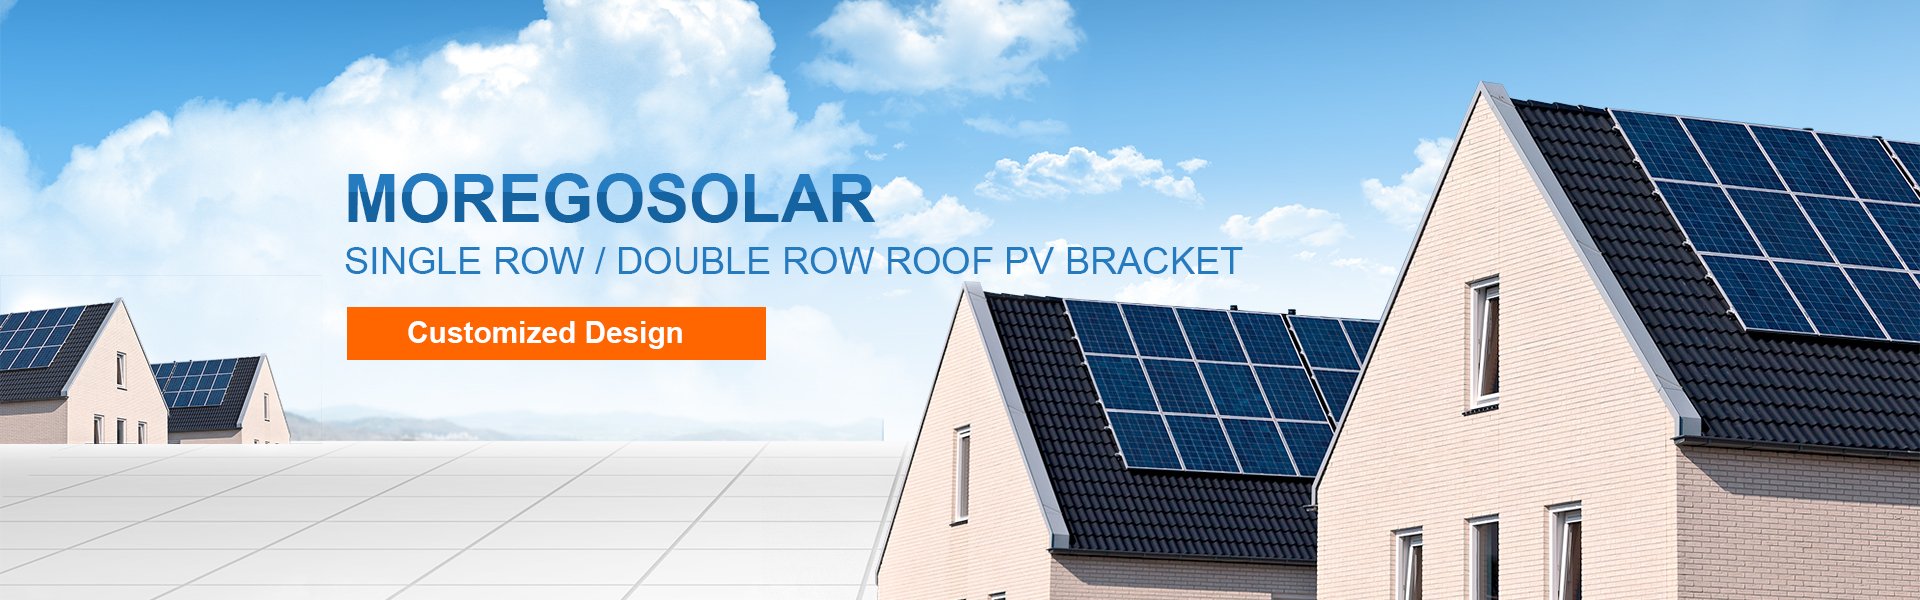 Tile Roof Photovoltaic brackets price